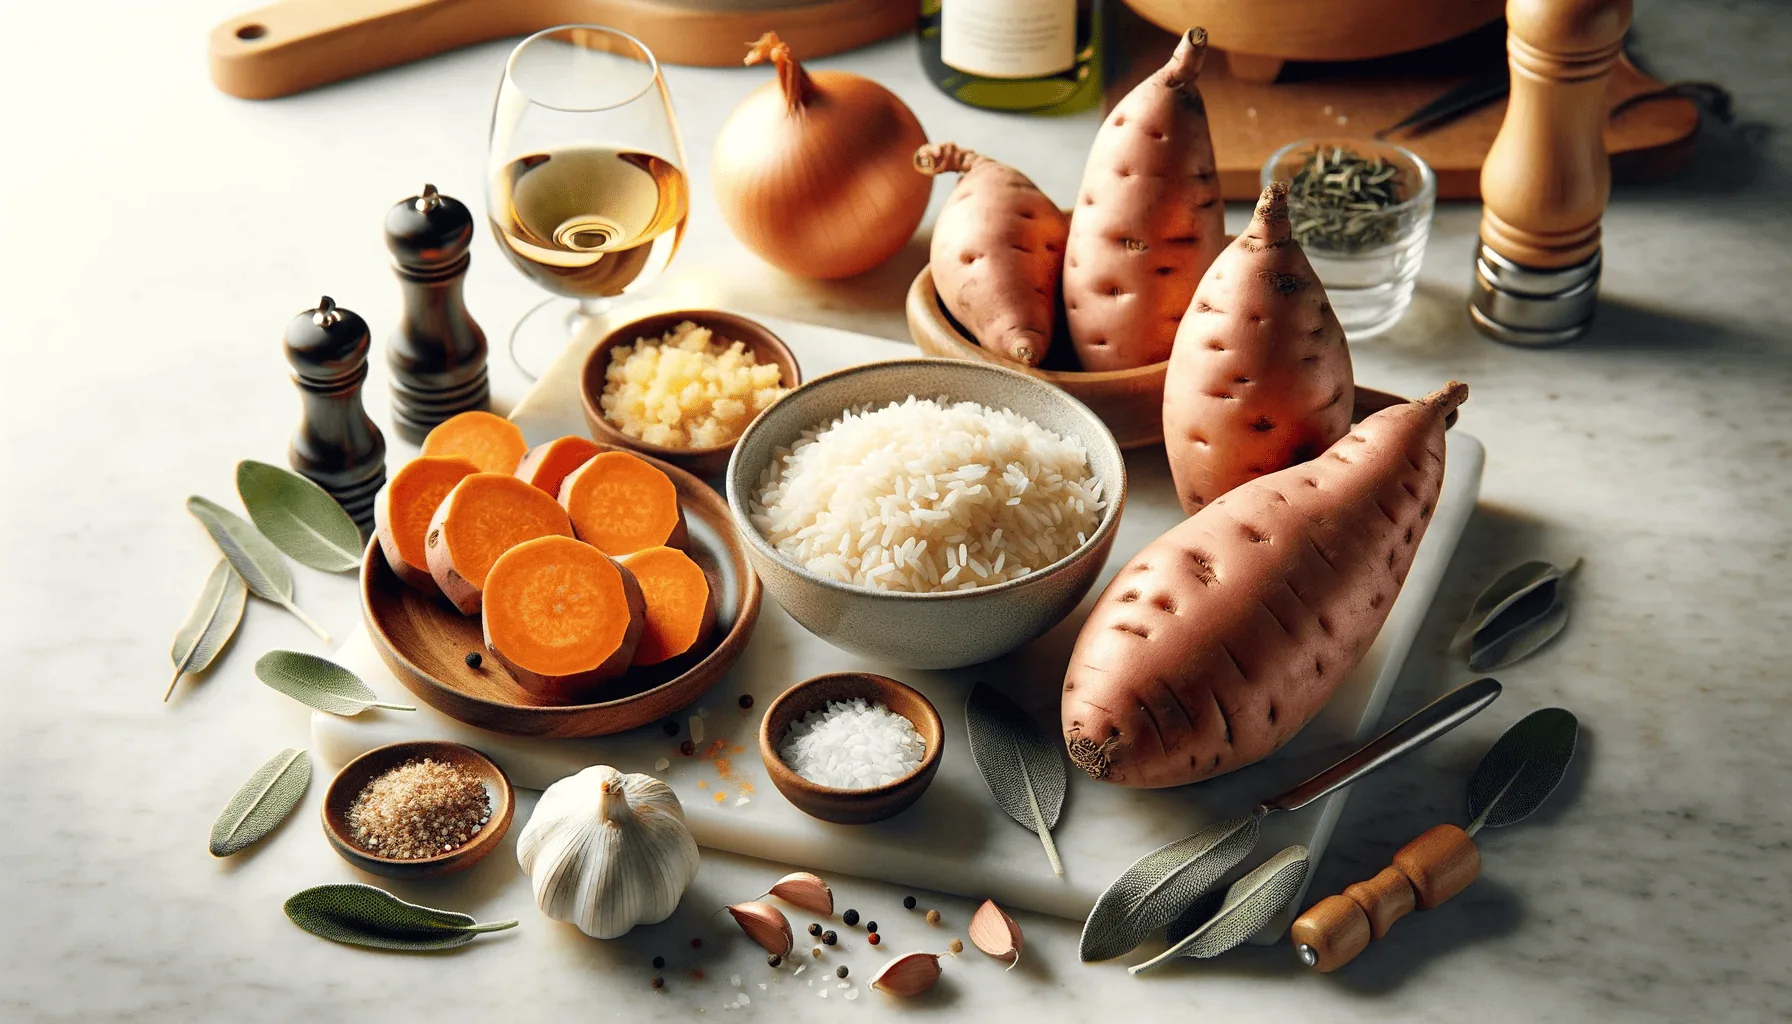 Ingredients for sweet potato risotto neatly arranged on a marble countertop